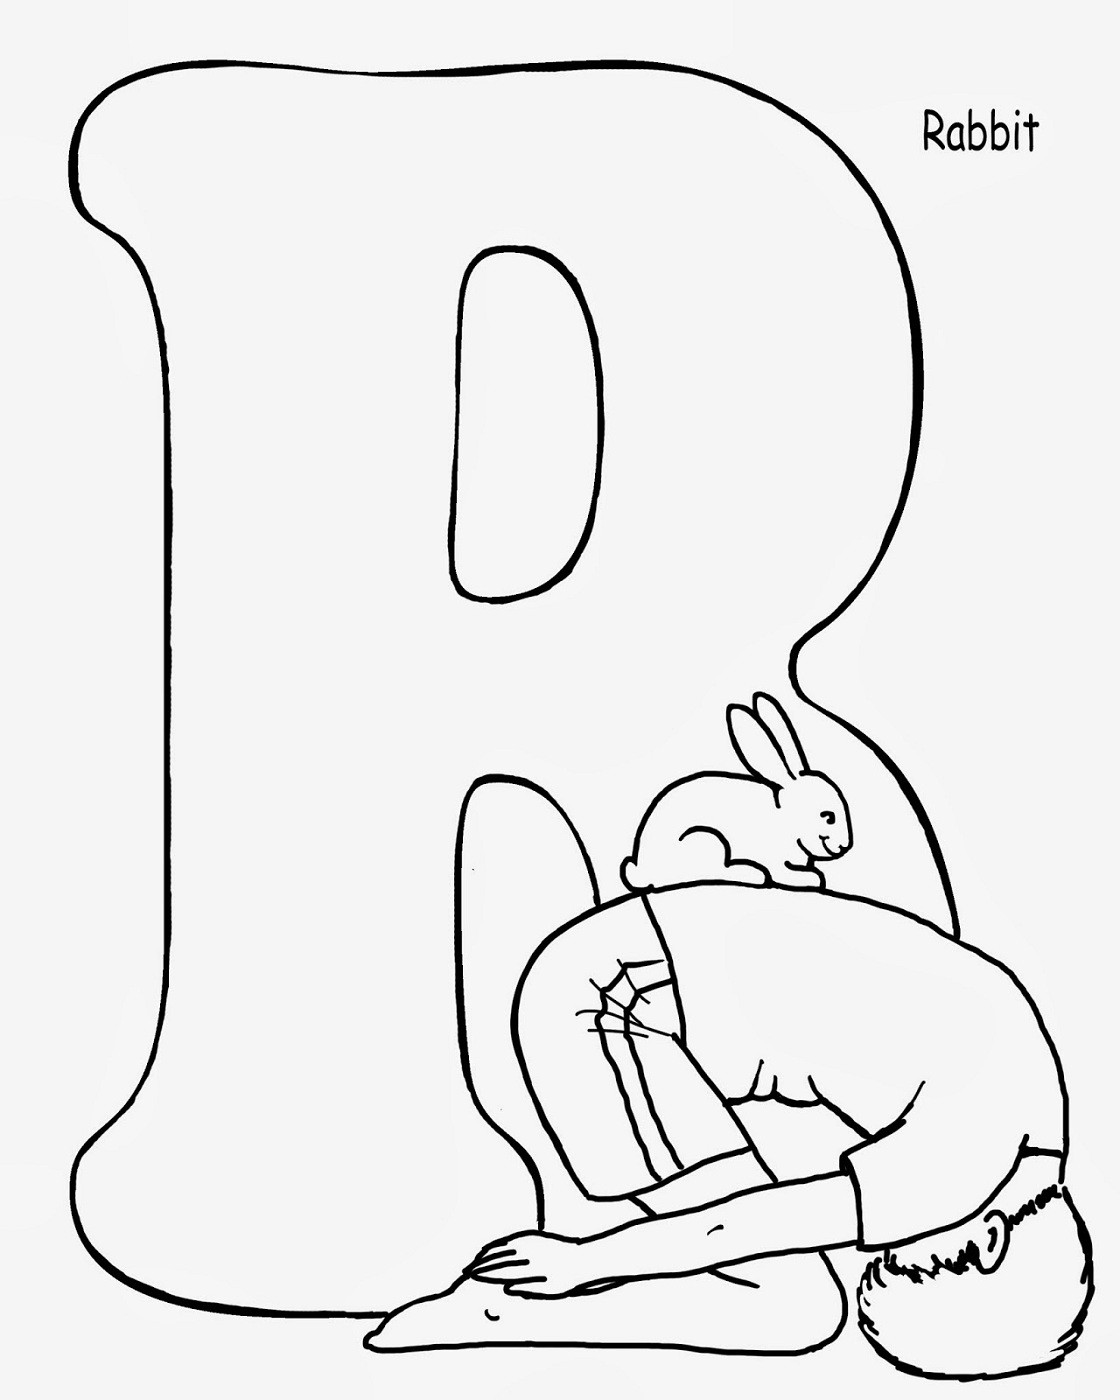 Coloring Sheets For Kids Com
 Yoga Coloring Pages to Print